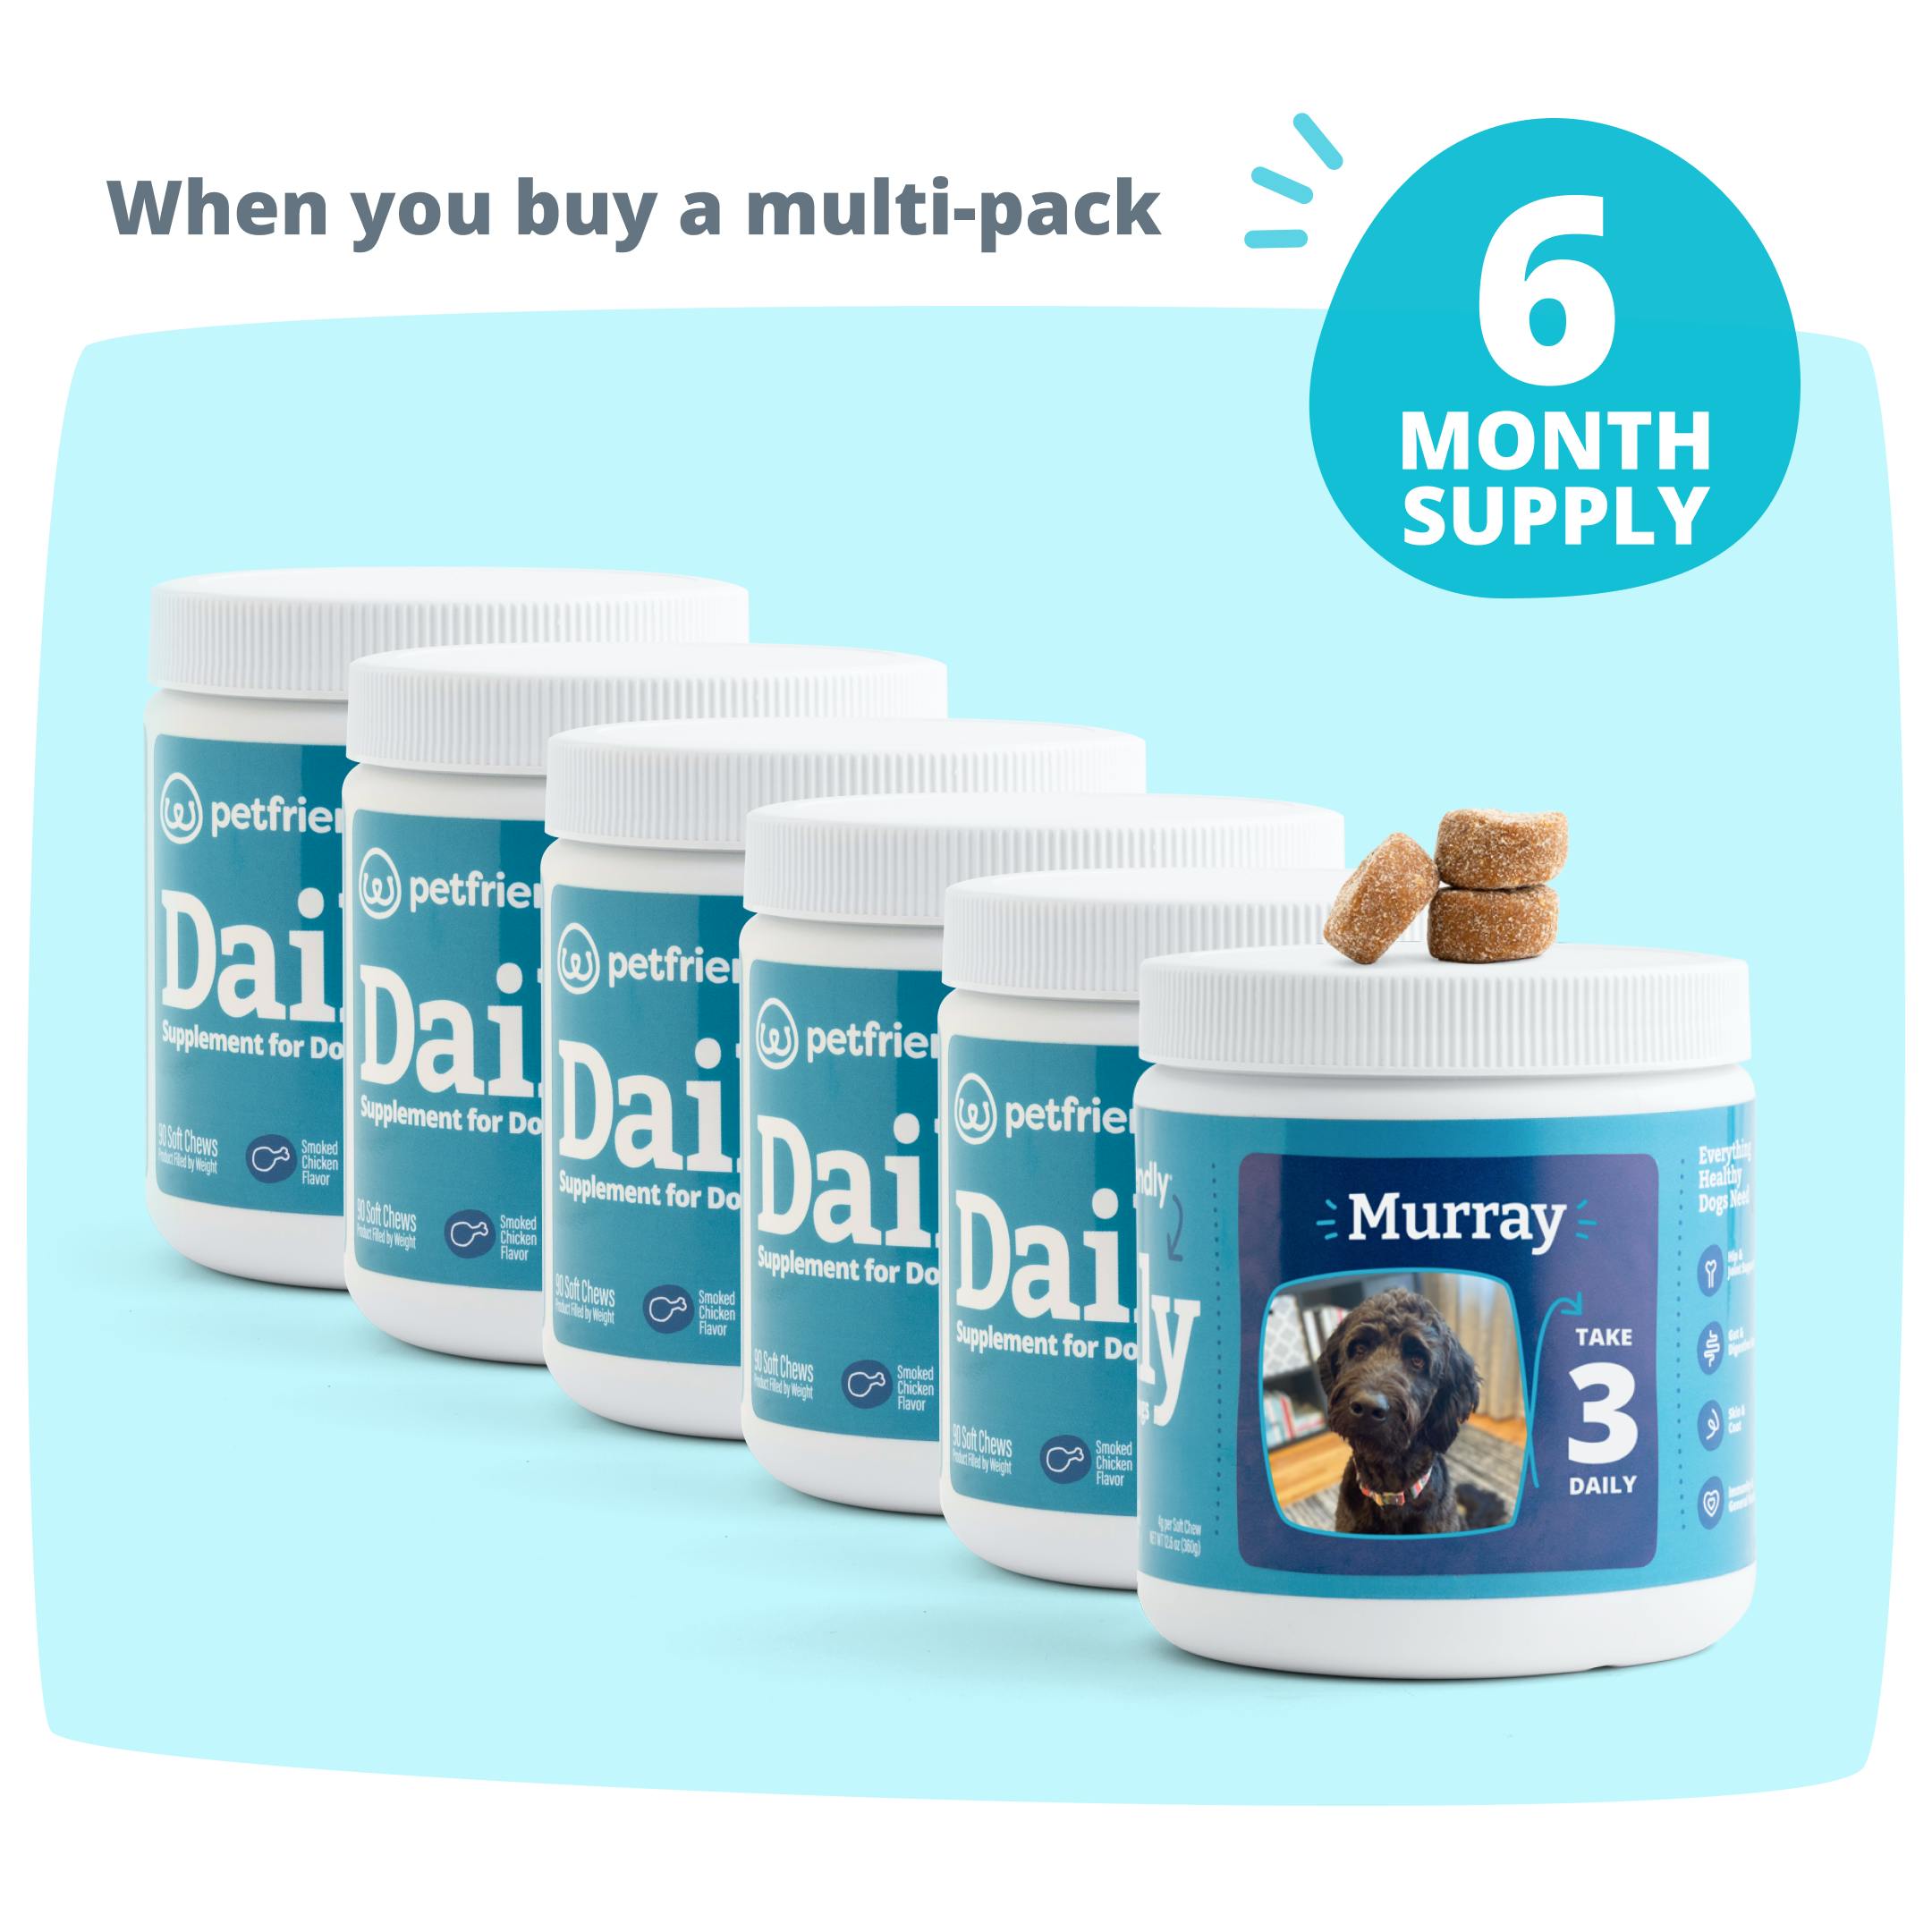 6 Pack of Daily Supplements